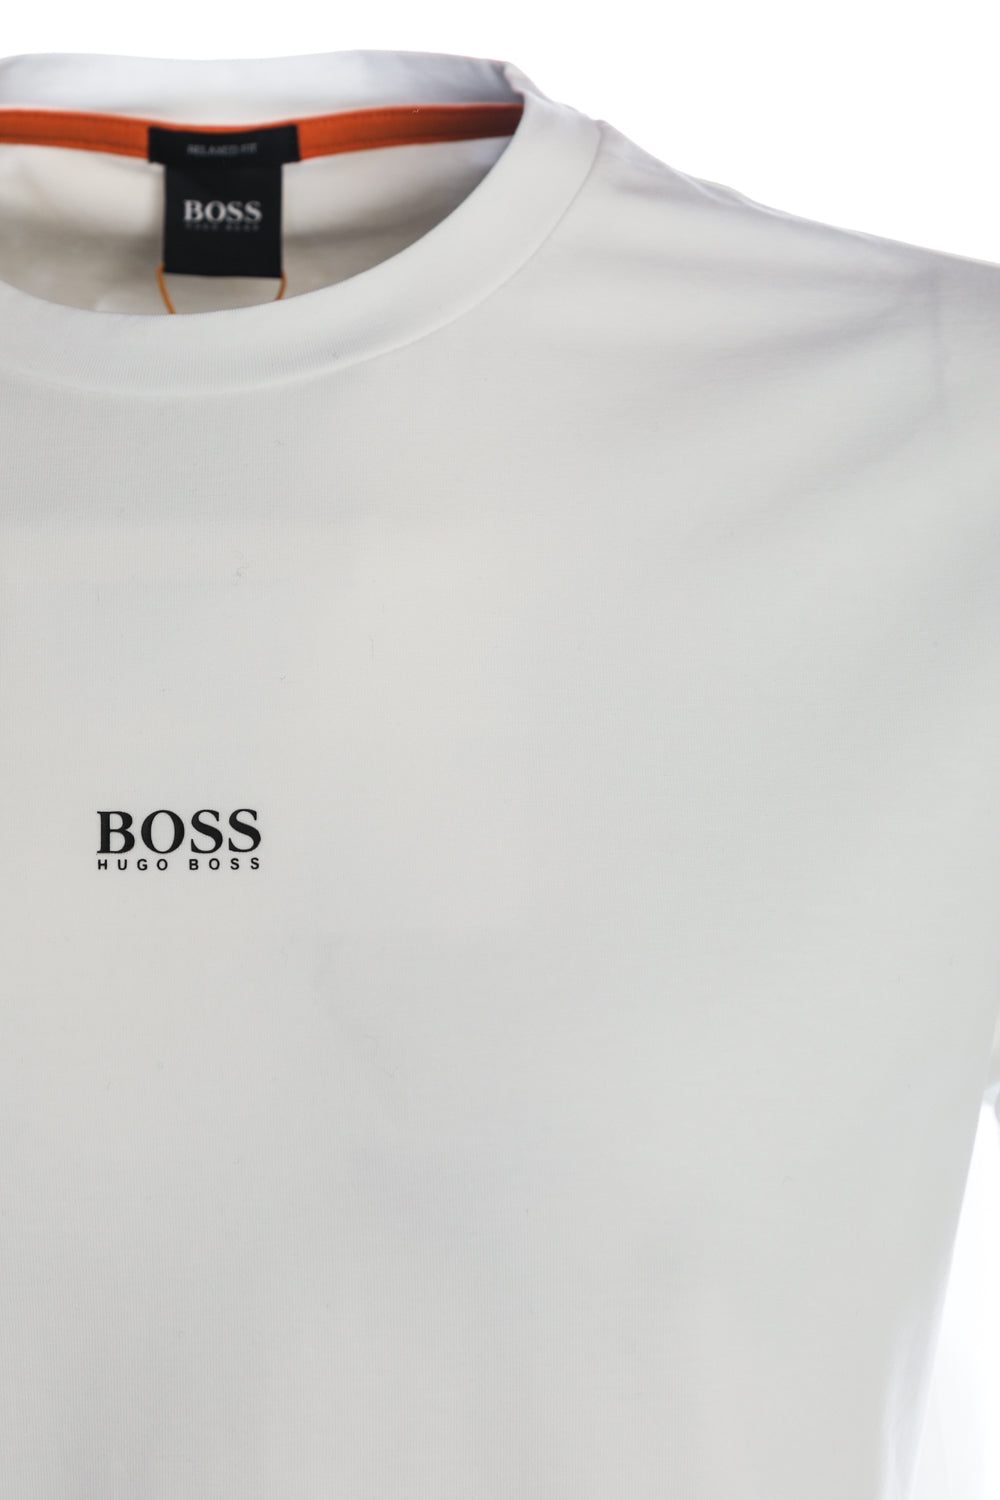 BOSS TChup T-Shirt in White